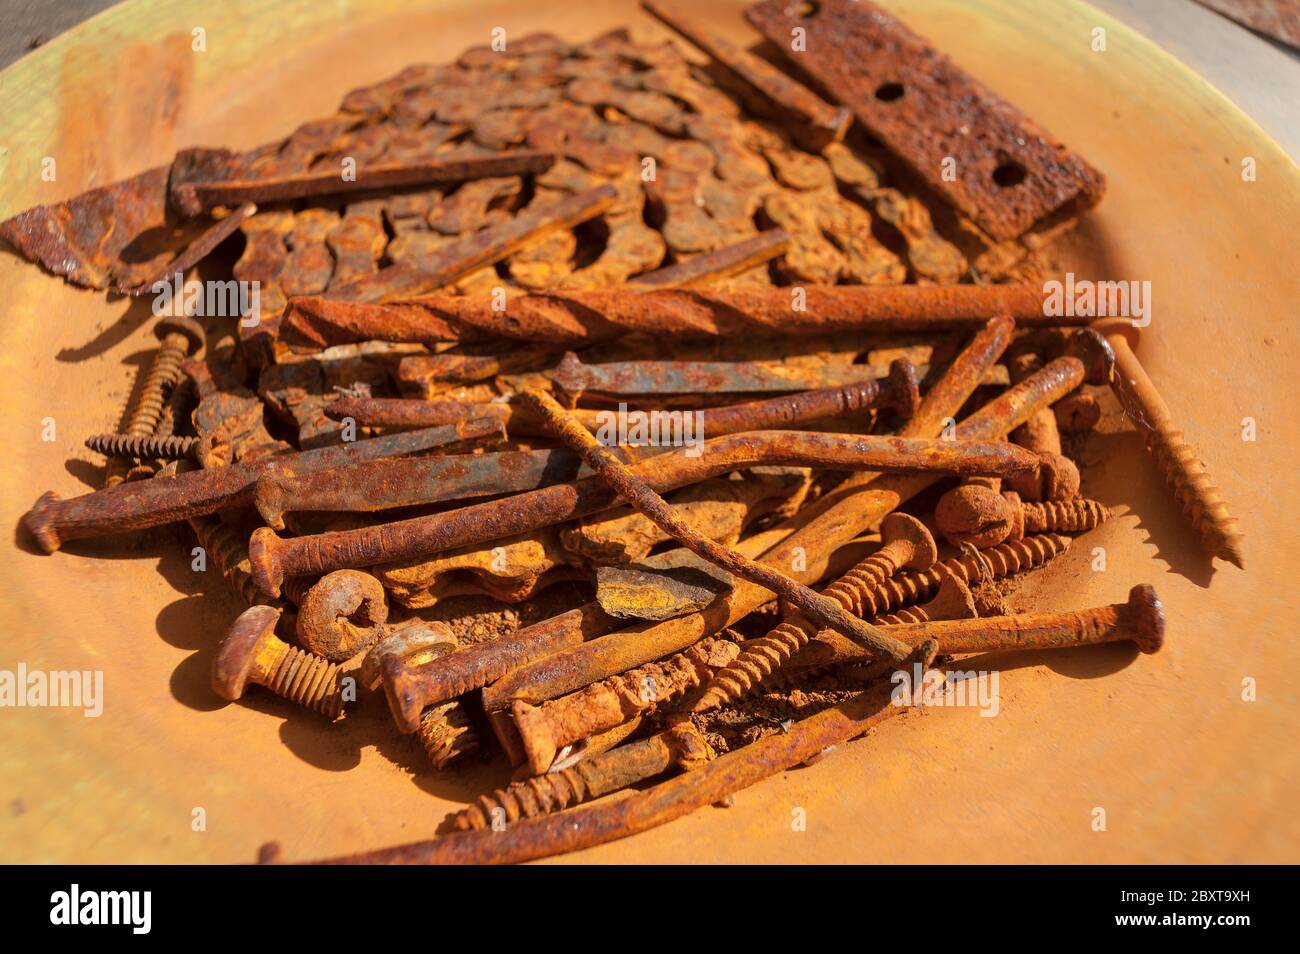 Pile of iron and steel nails, screws, metal and chain left to rust in outside plate showing rusty brown orange stains Stock Photo